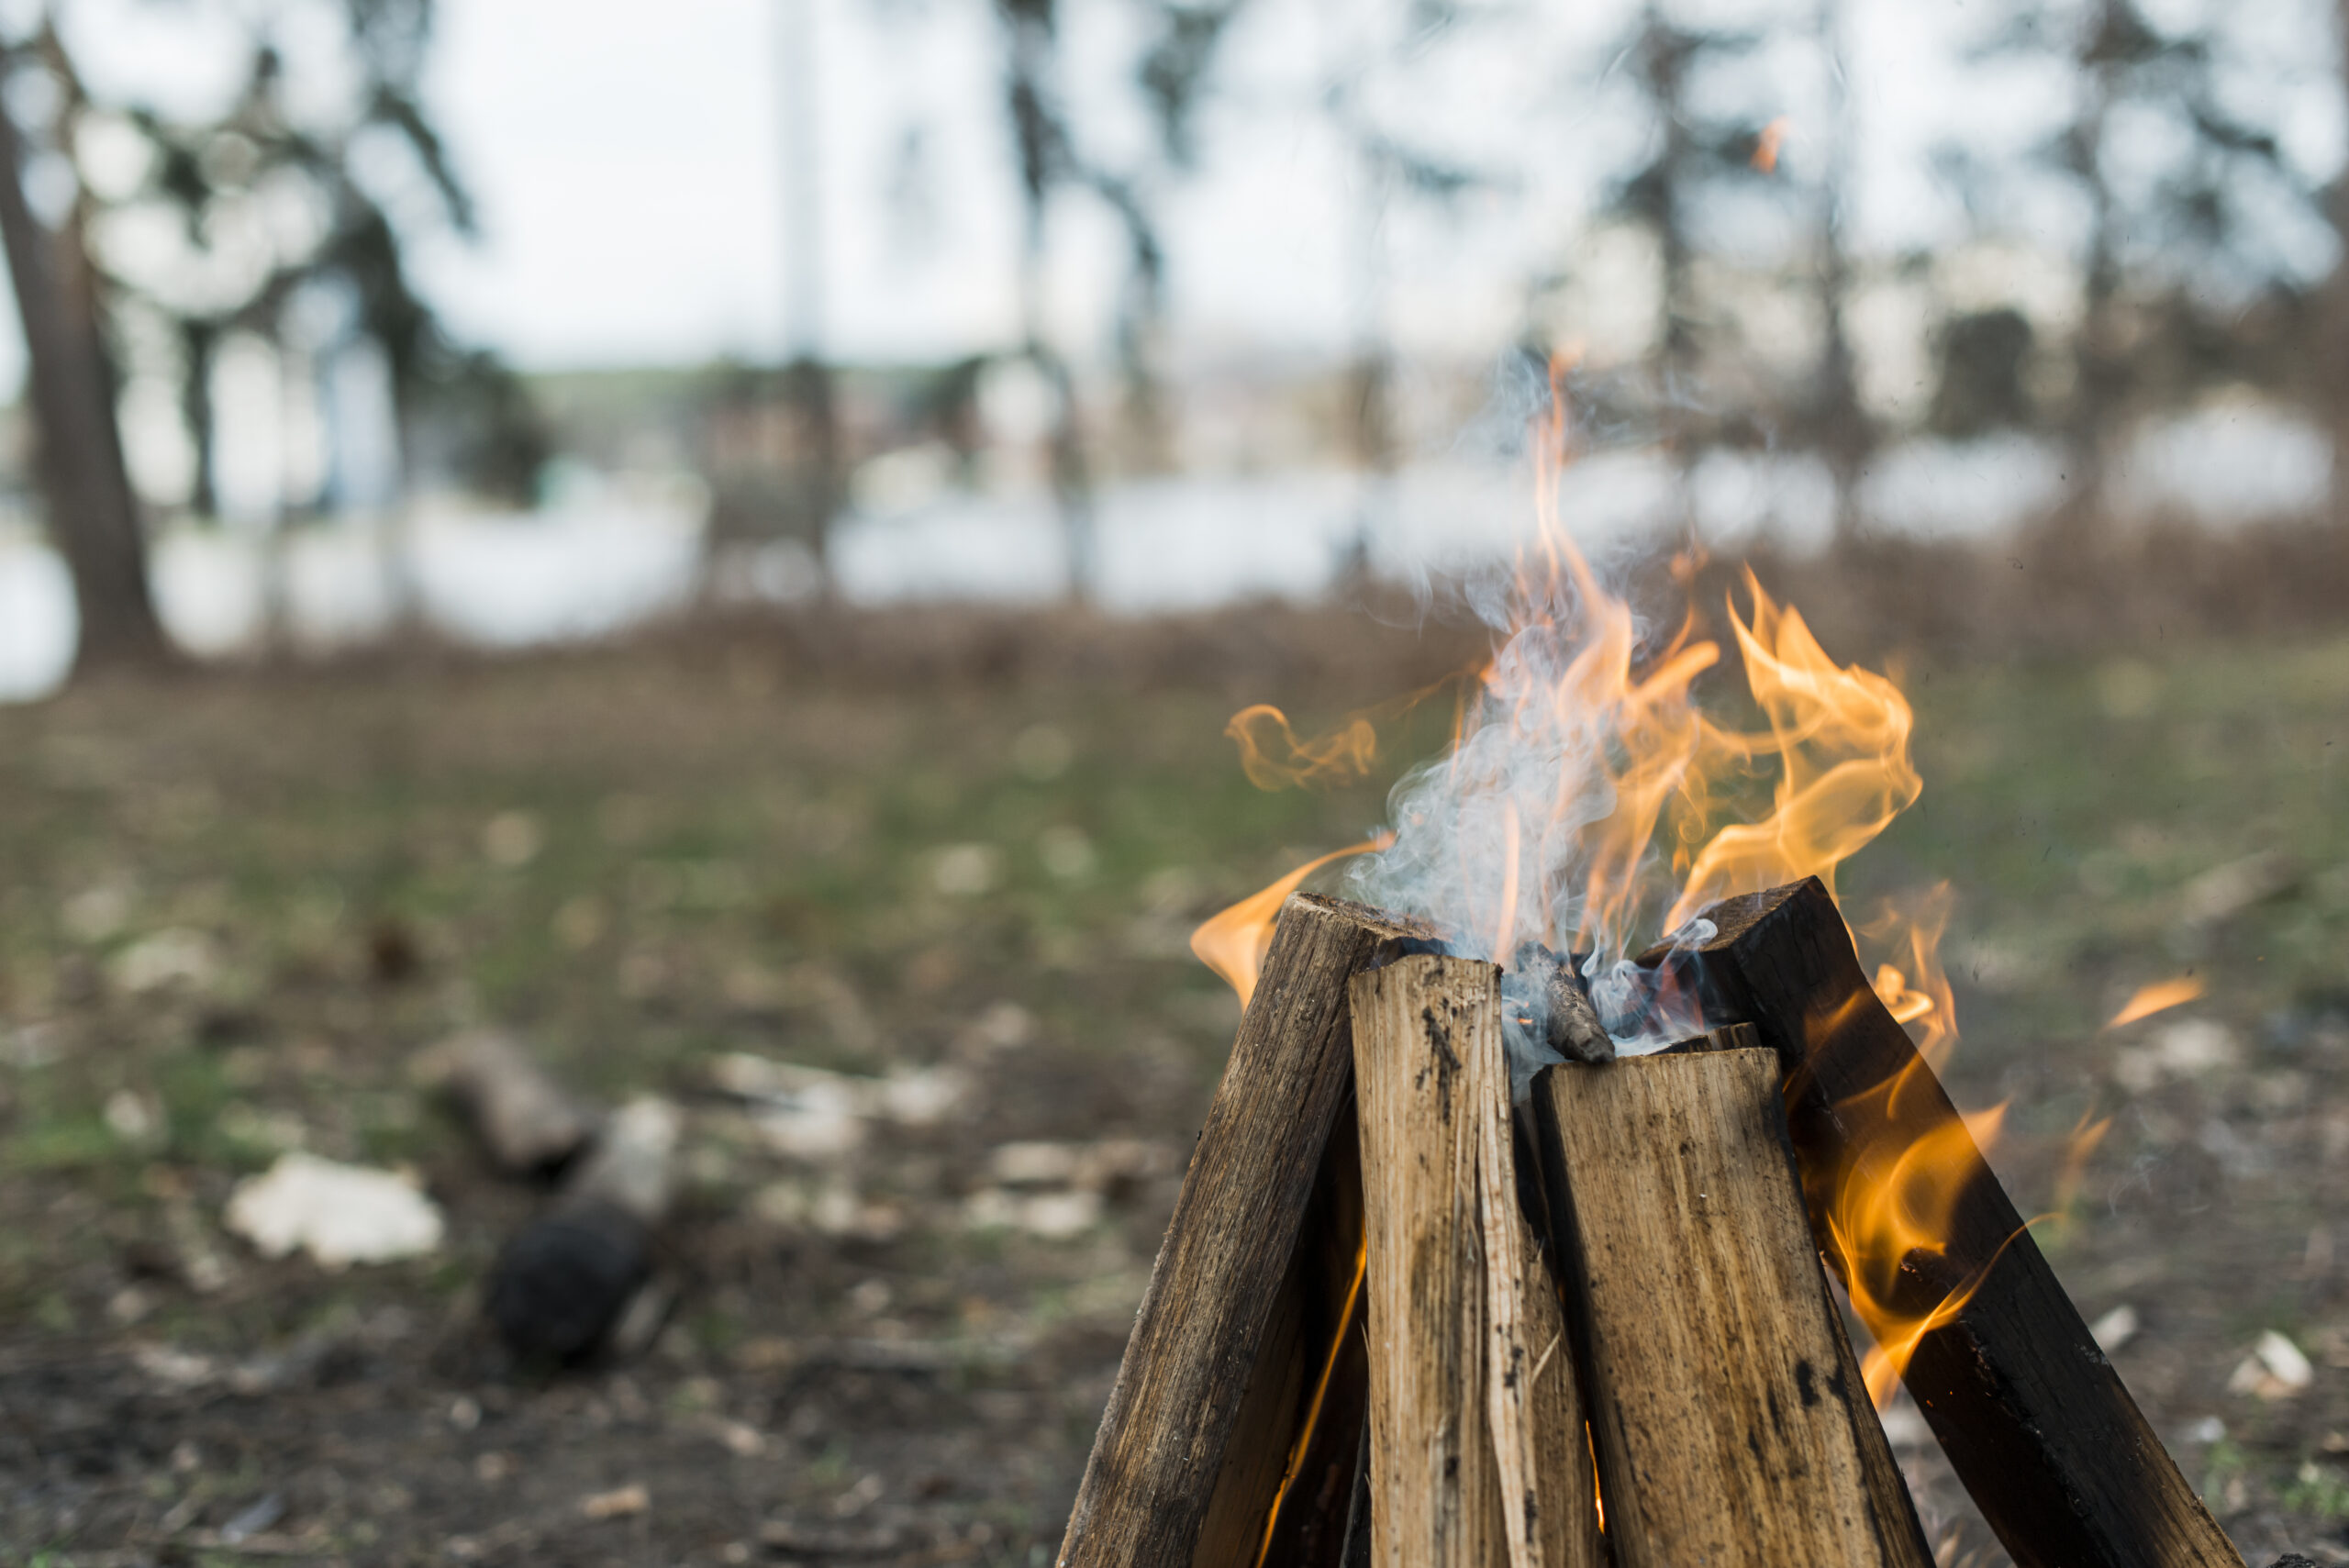 Get Toasty: How to Build a Campfire Without Looking Like a Buffoon